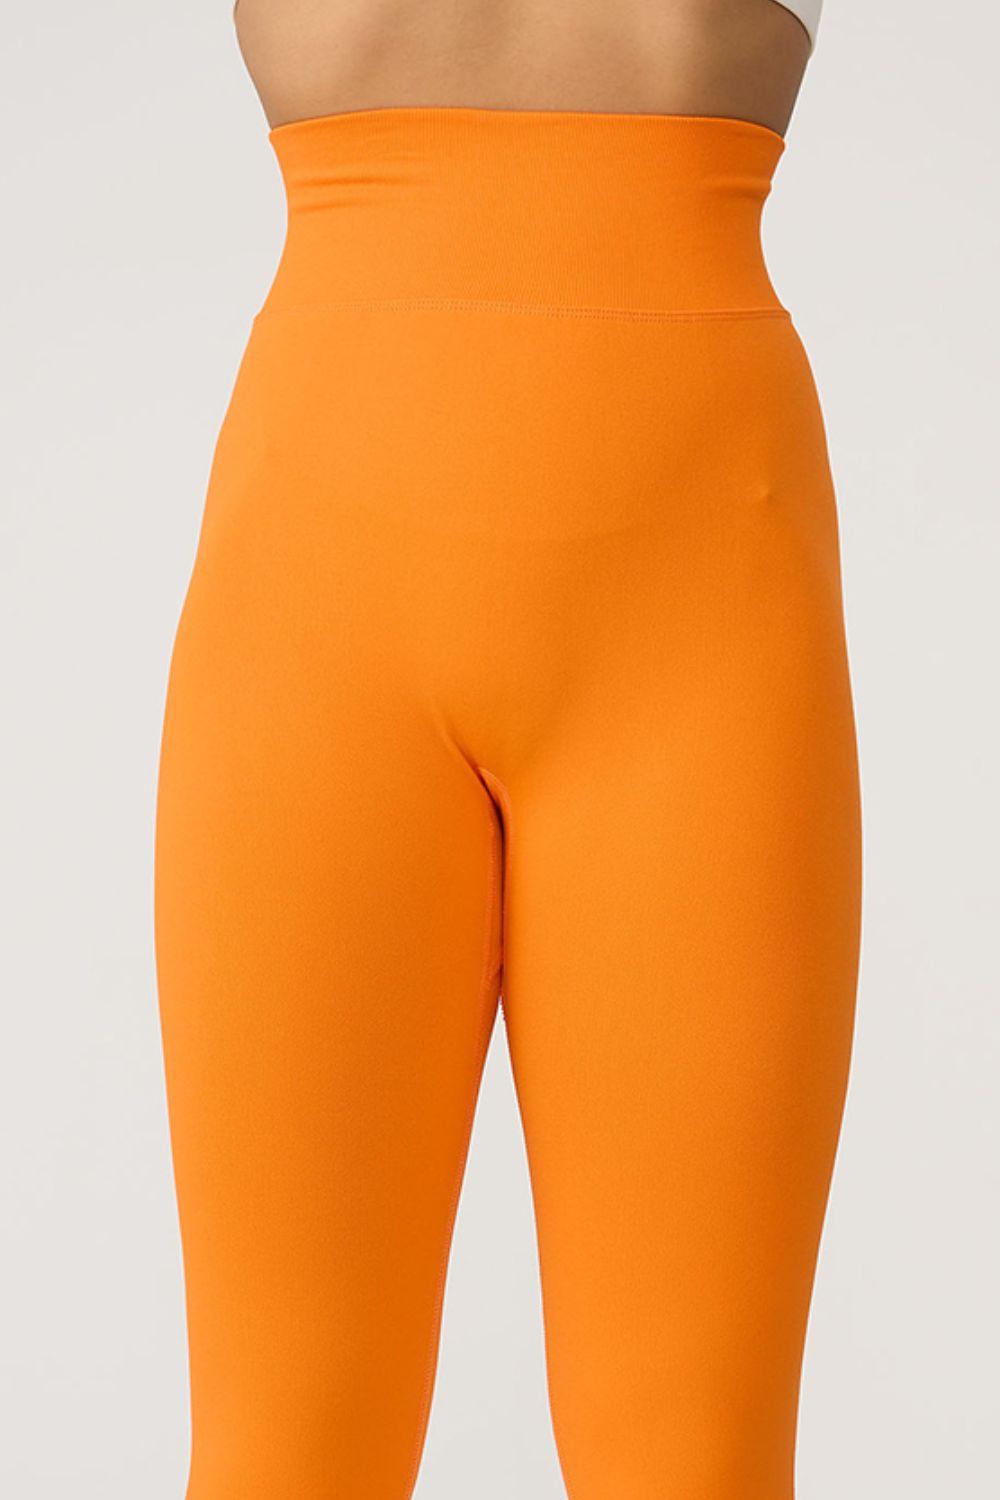 a close up of a woman's butt in an orange leggings